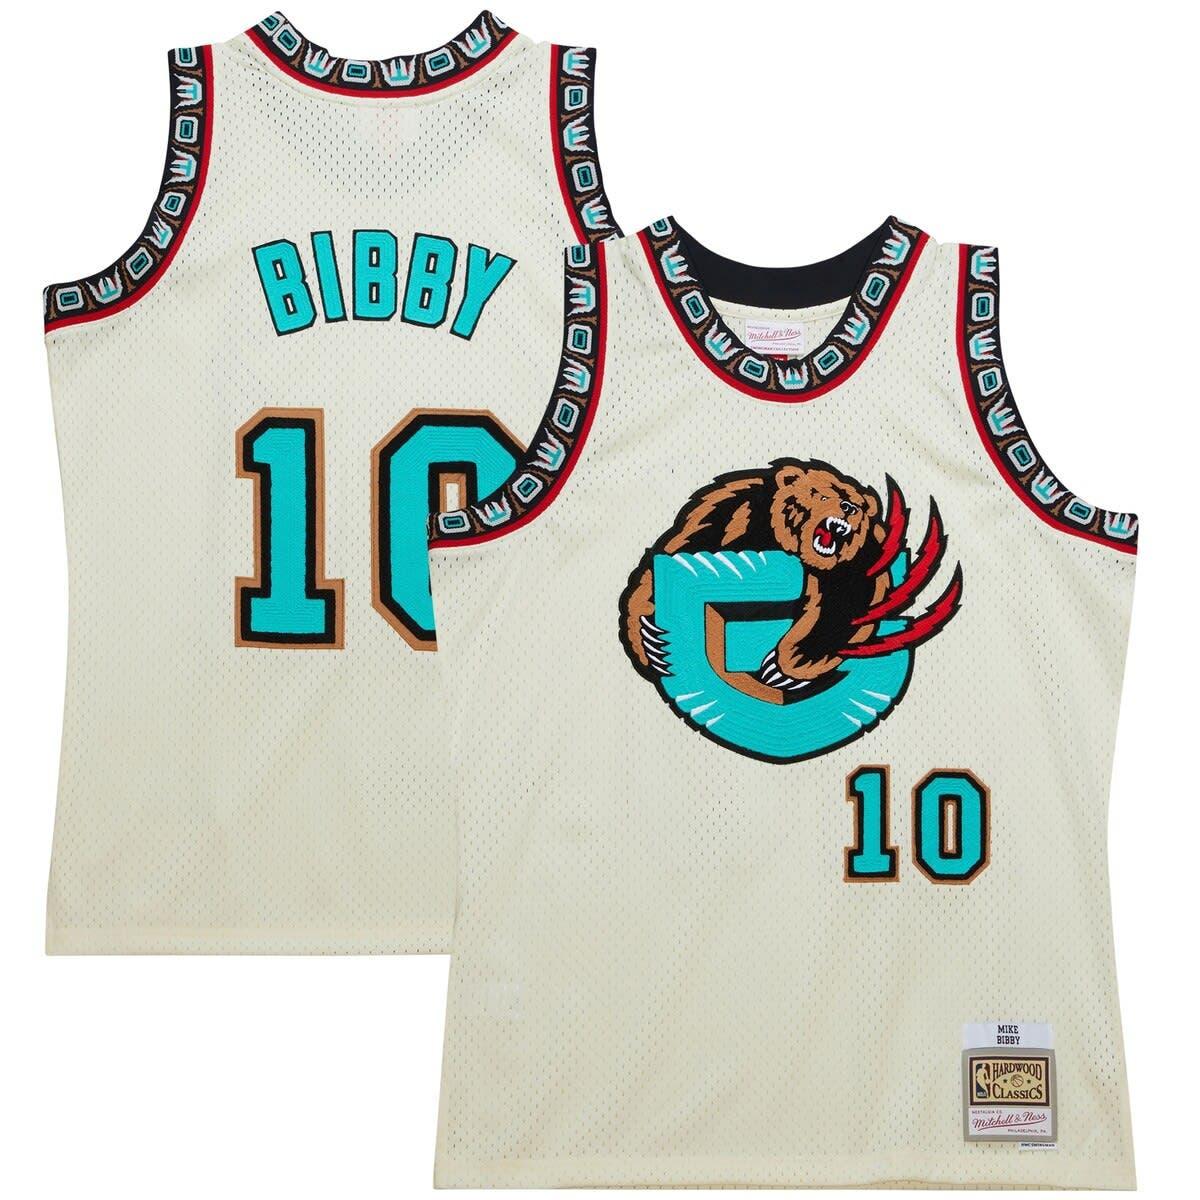  Mitchell & Ness Mike Bibby Vancouver Grizzlies 2000-01